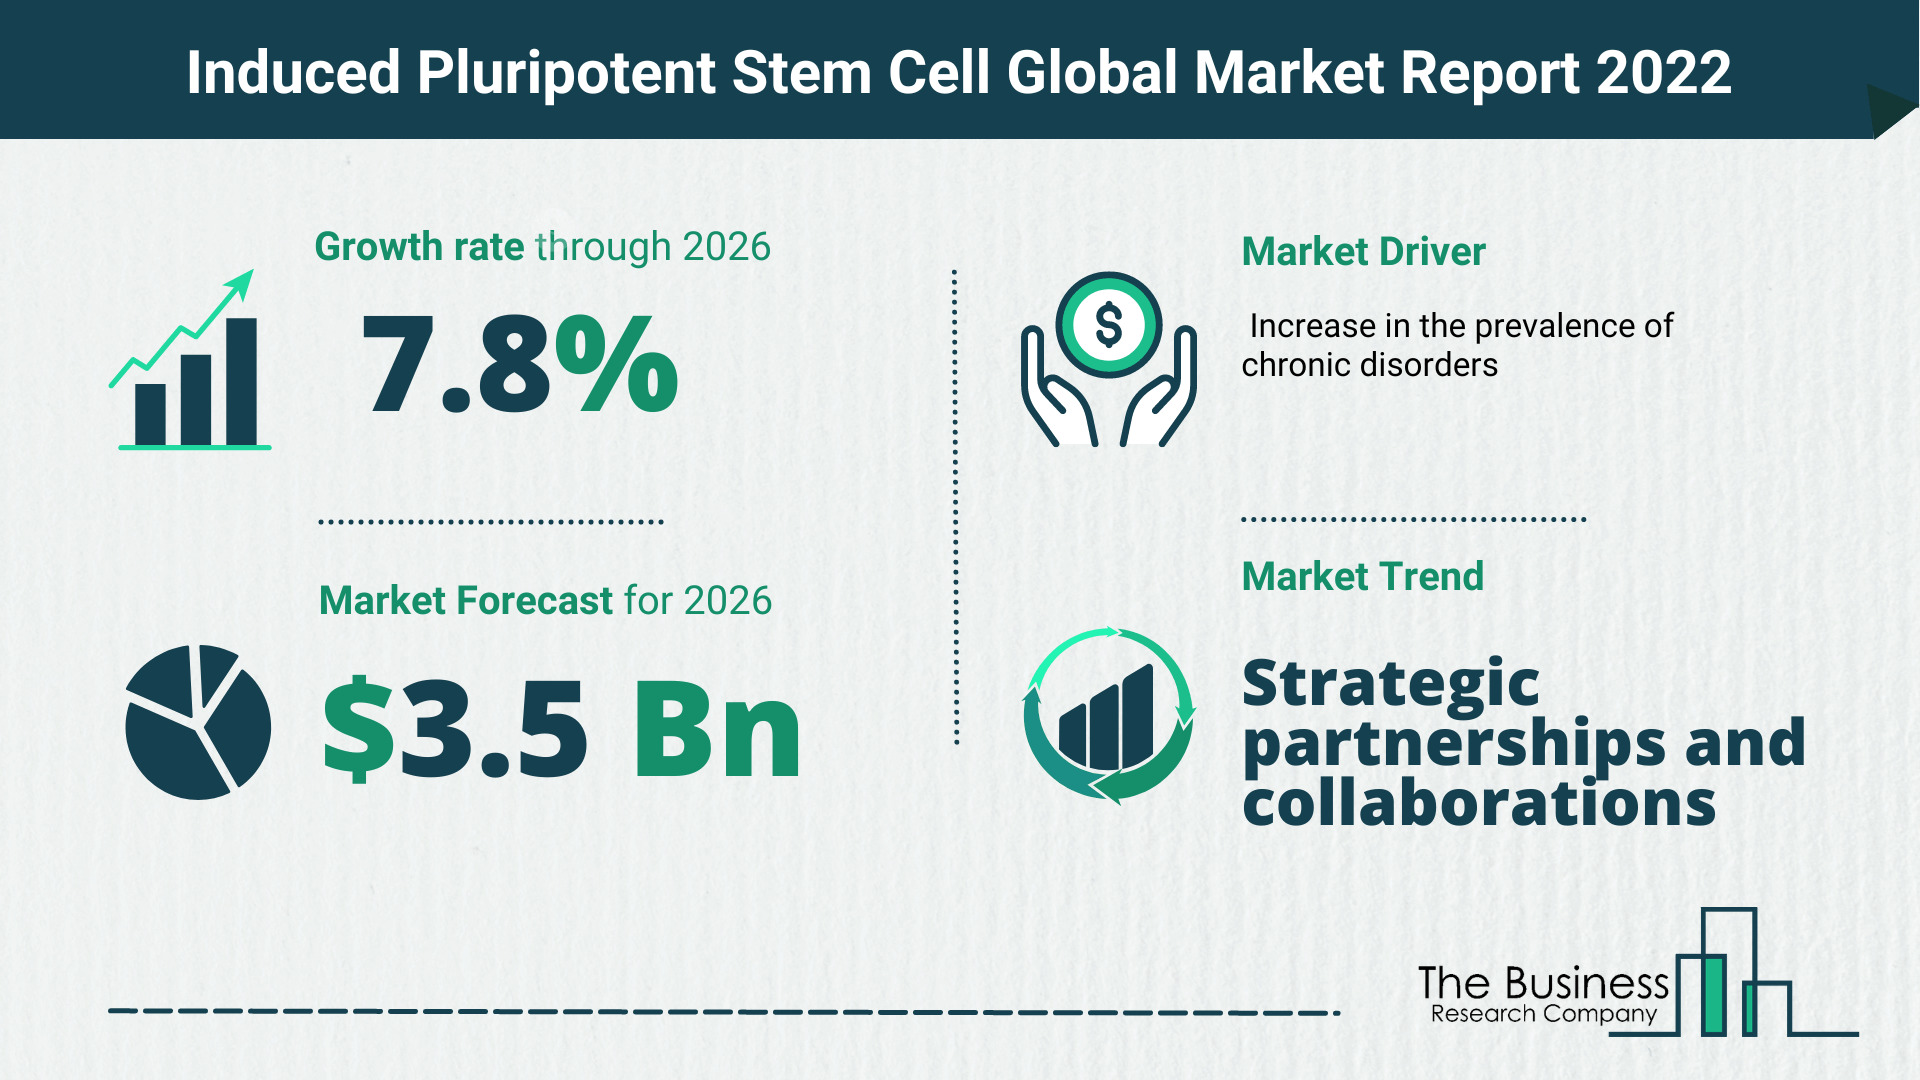 Global Induced Pluripotent Stem Cell Market